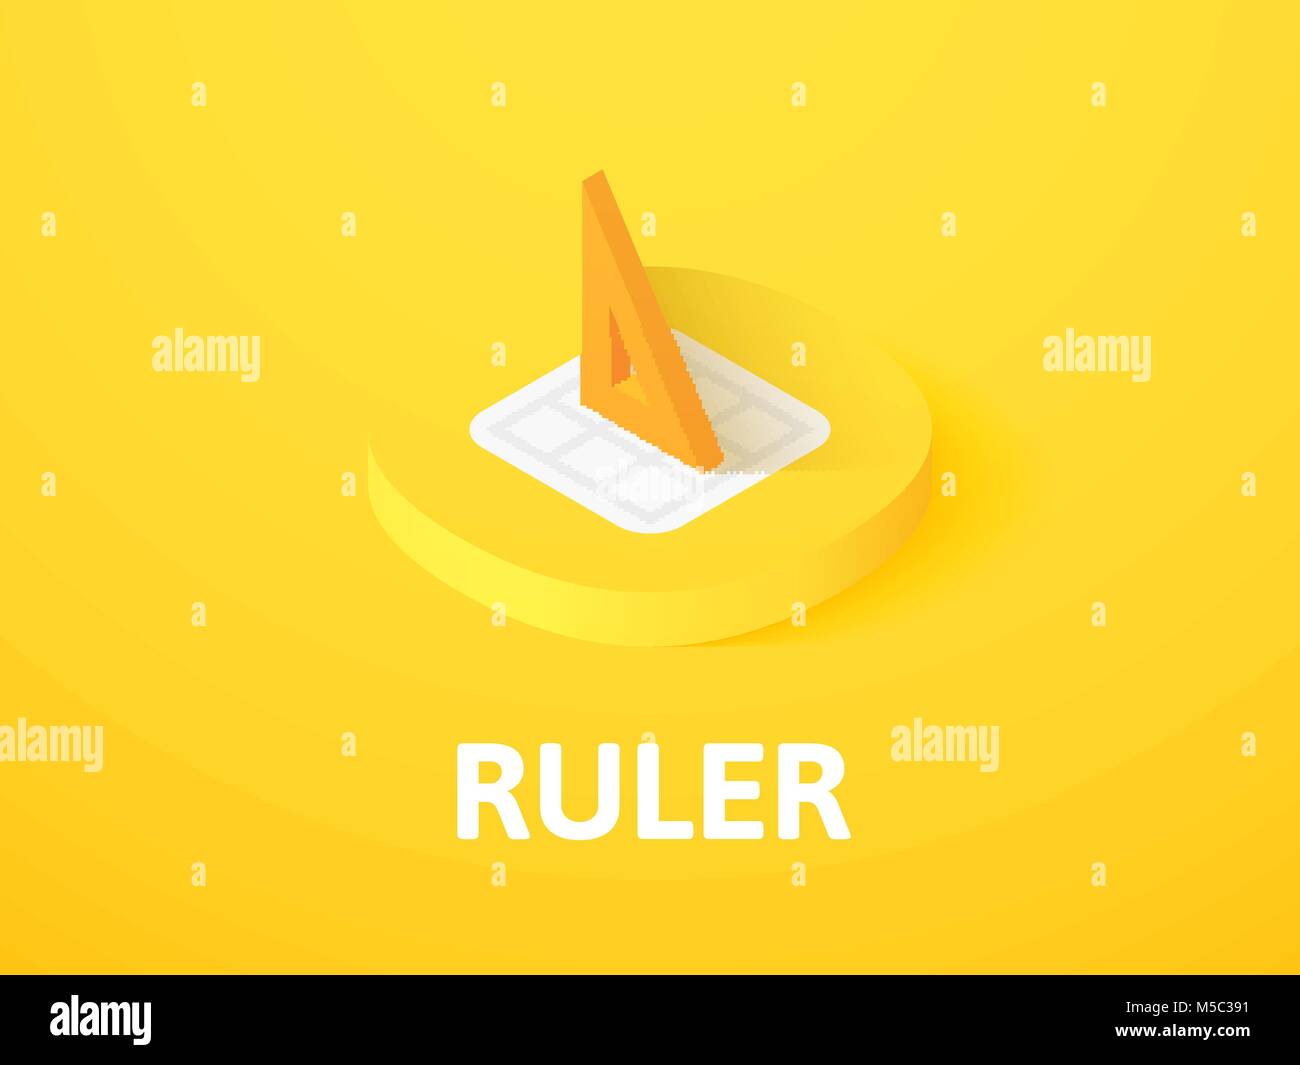 Ruler isometric icon, isolated on color background Stock Vector